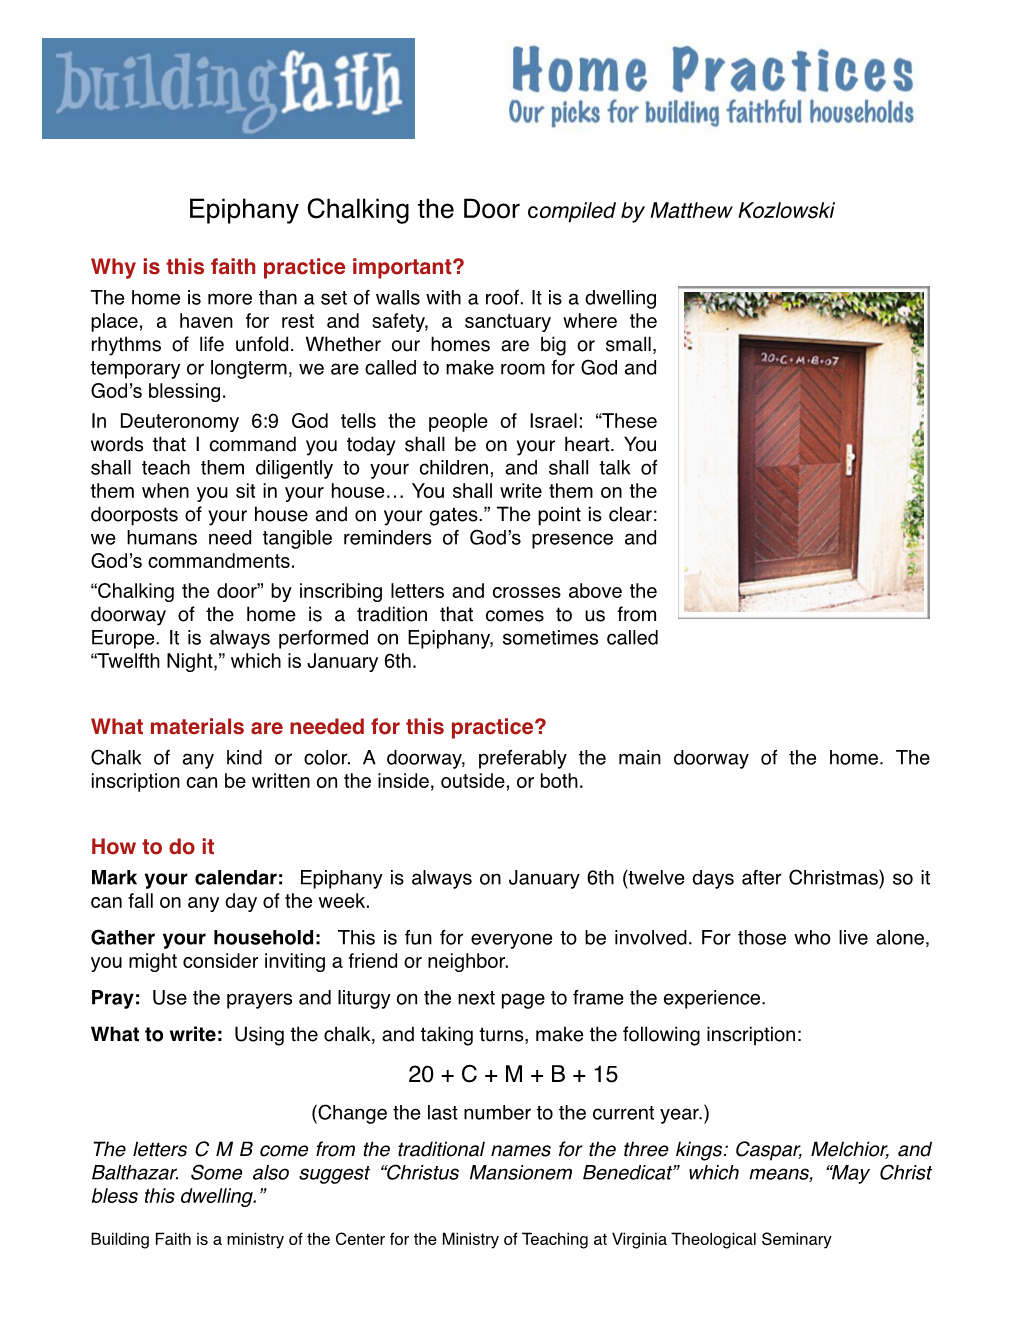 Chalking the Door Compiled by Matthew Kozlowski